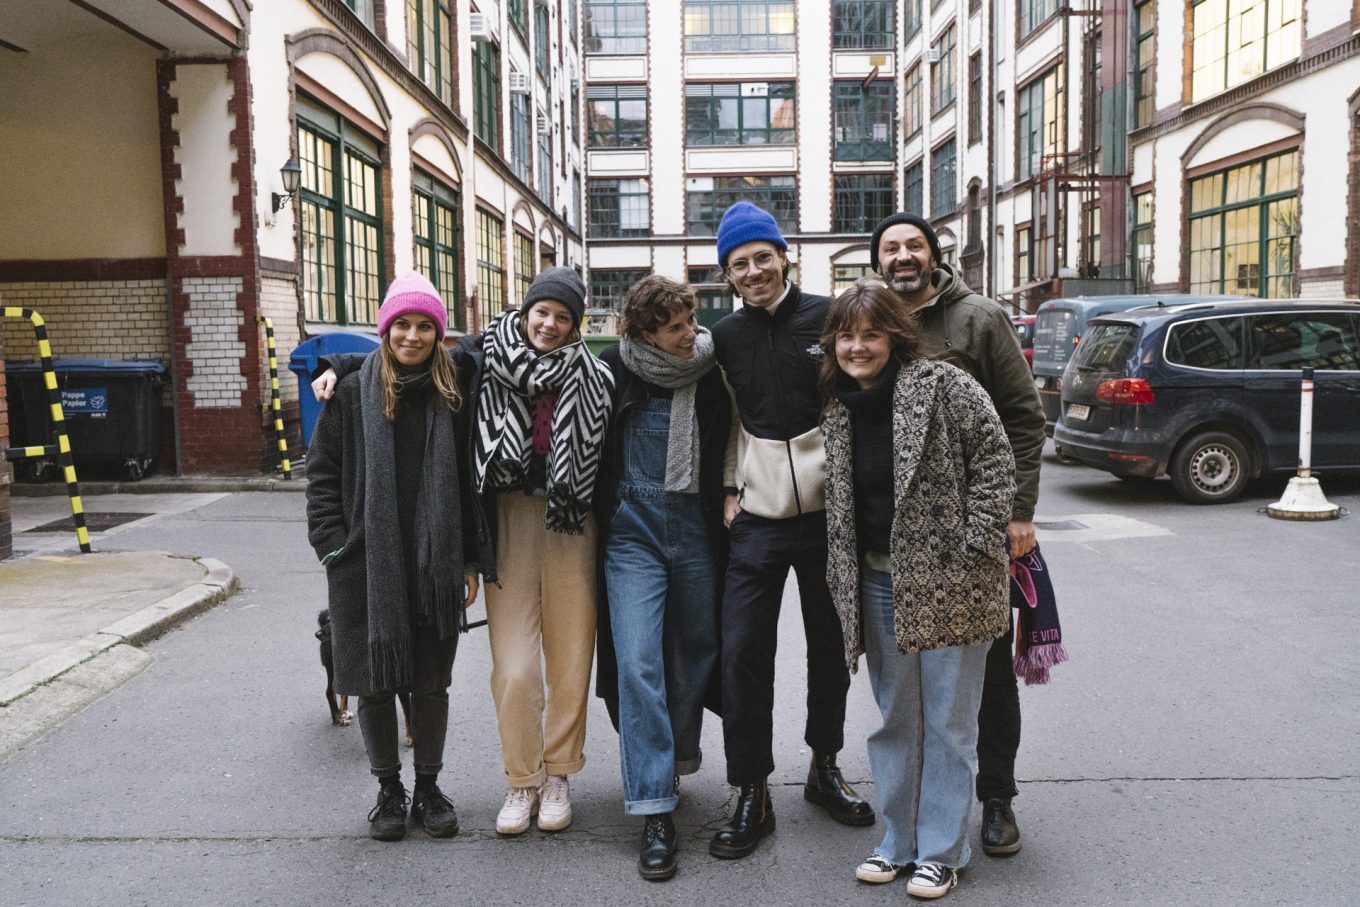 Group of young people with winter clothes